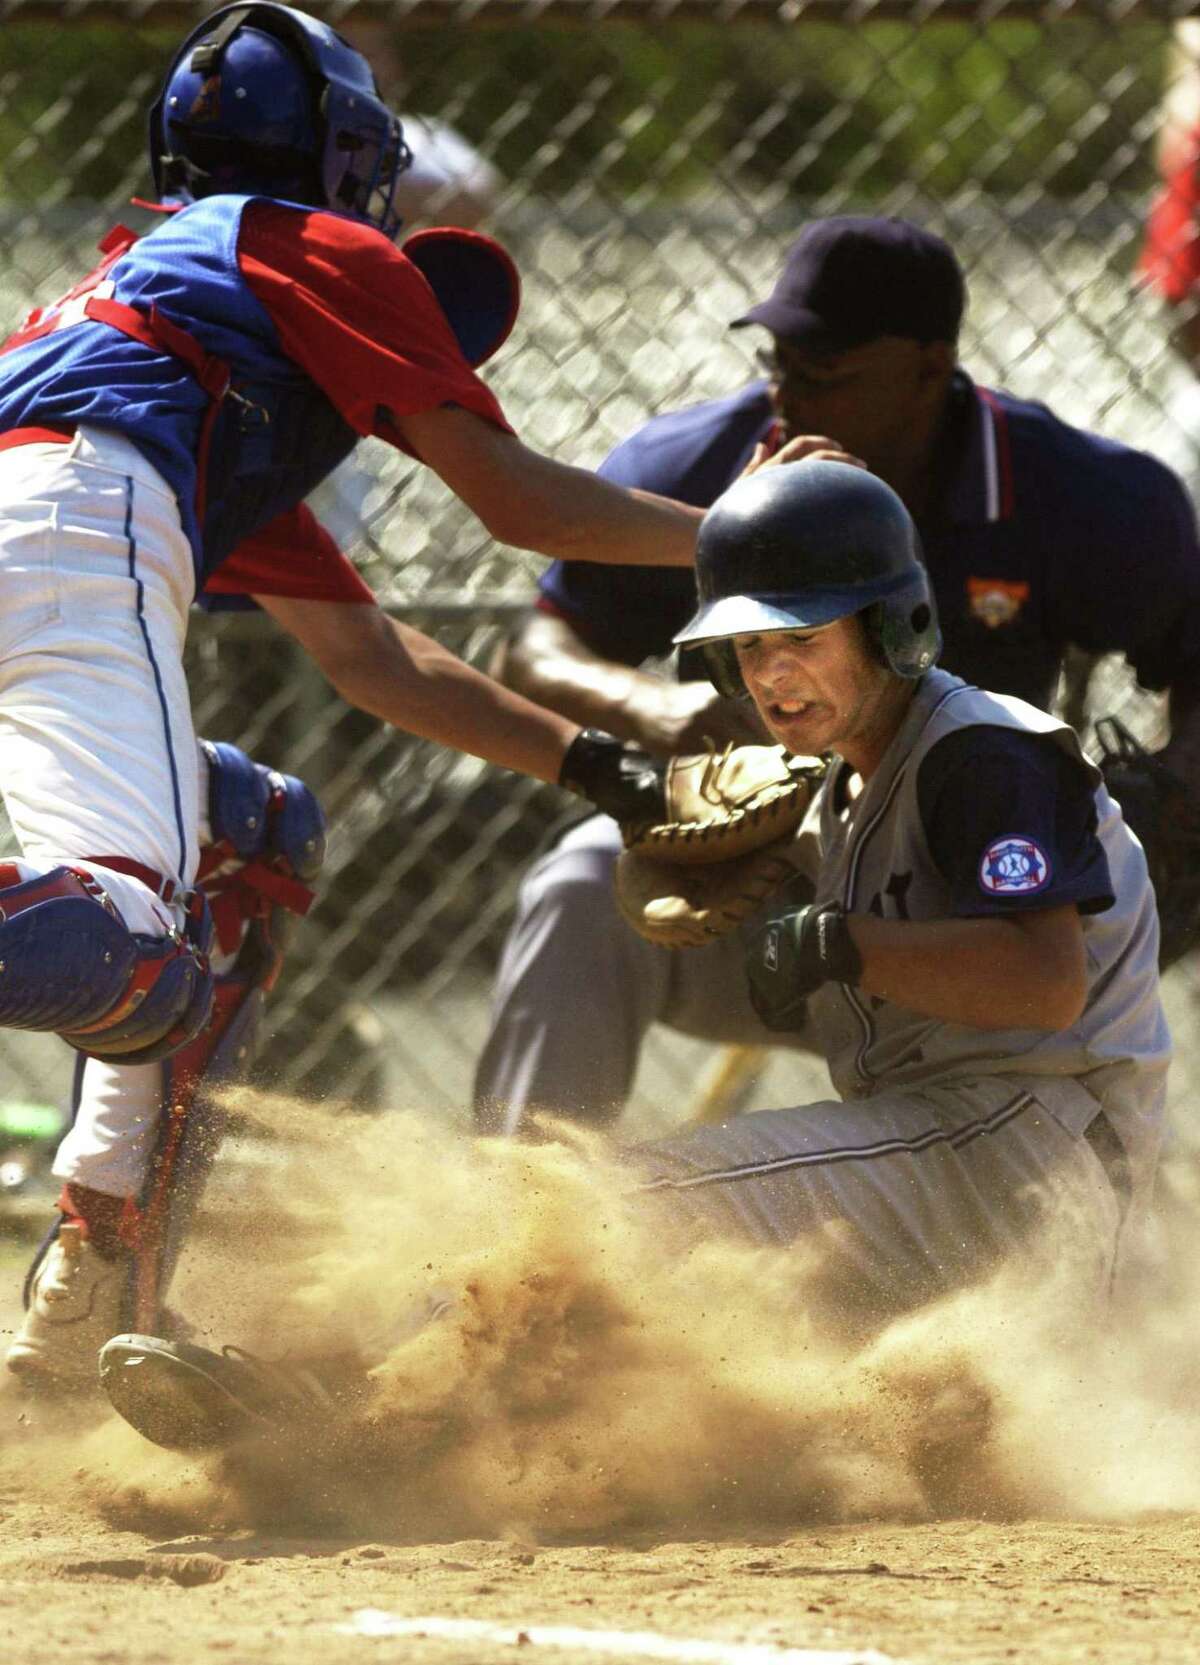 Norwalk’s Matt Harbilas arrives safely at home as Stamford catcher Kyle Foti makes a late tag in a 2004 Babe Ruth game.